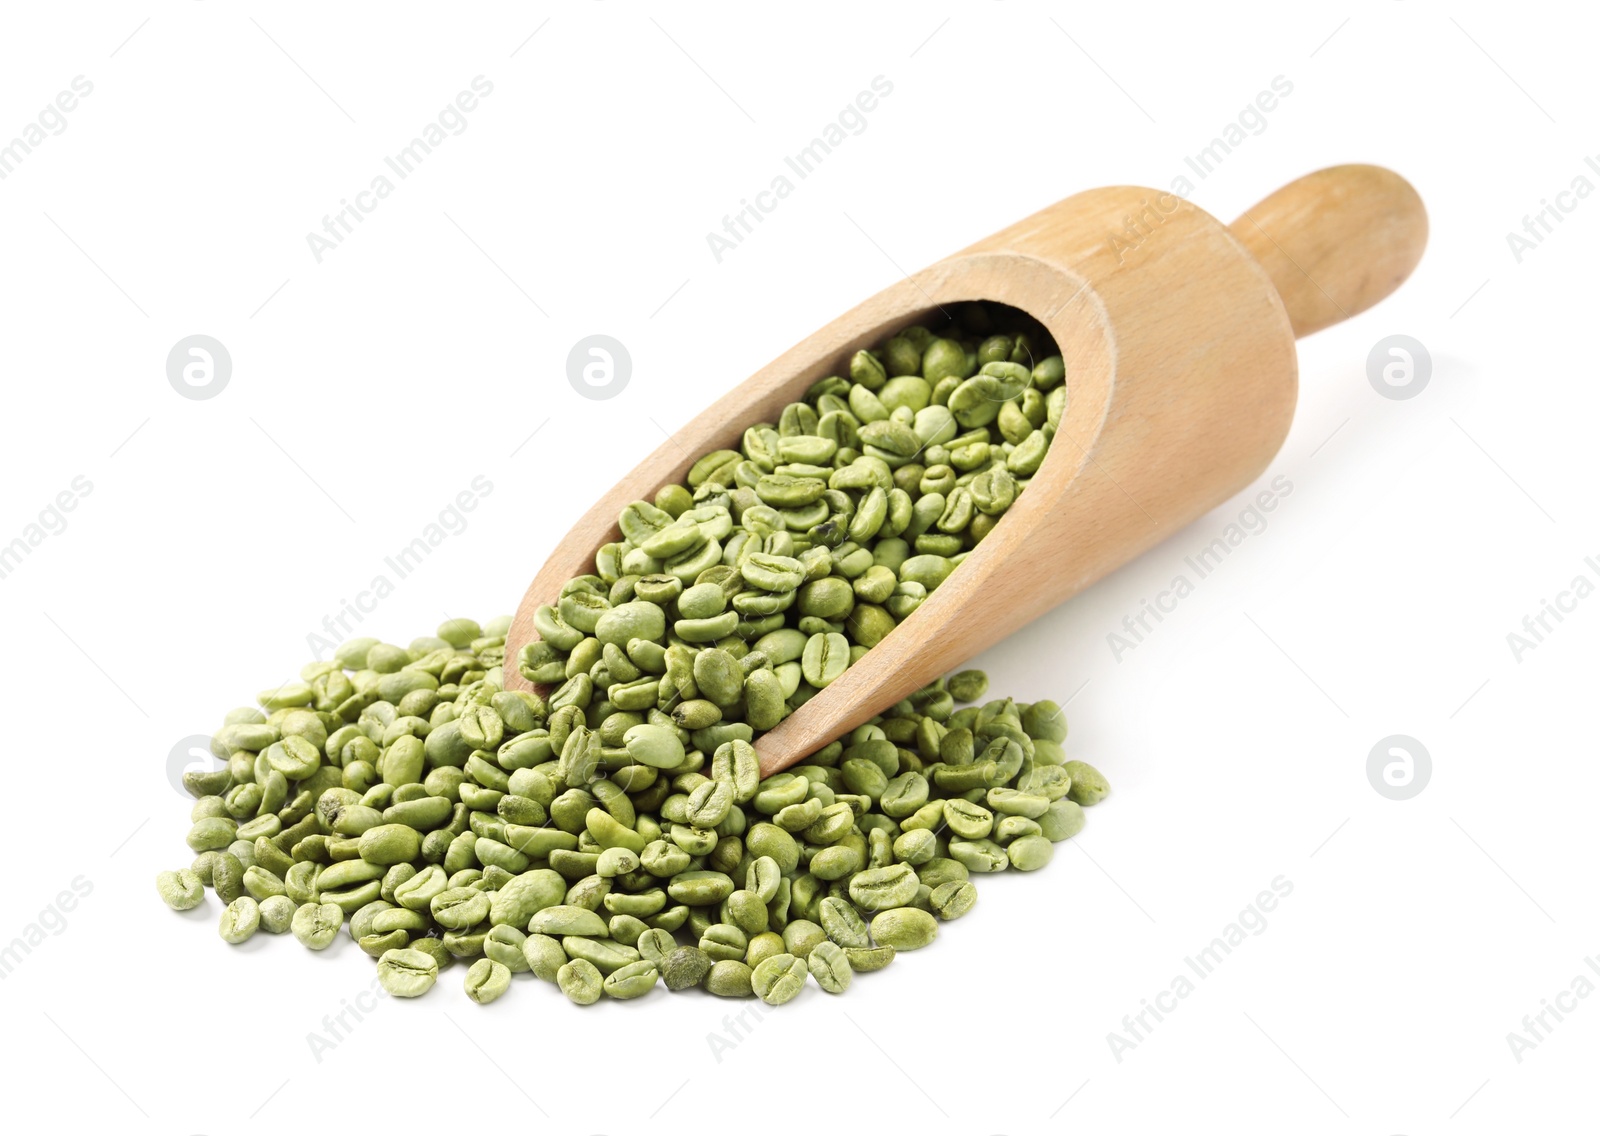 Photo of Pile of green coffee beans and wooden scoop on white background